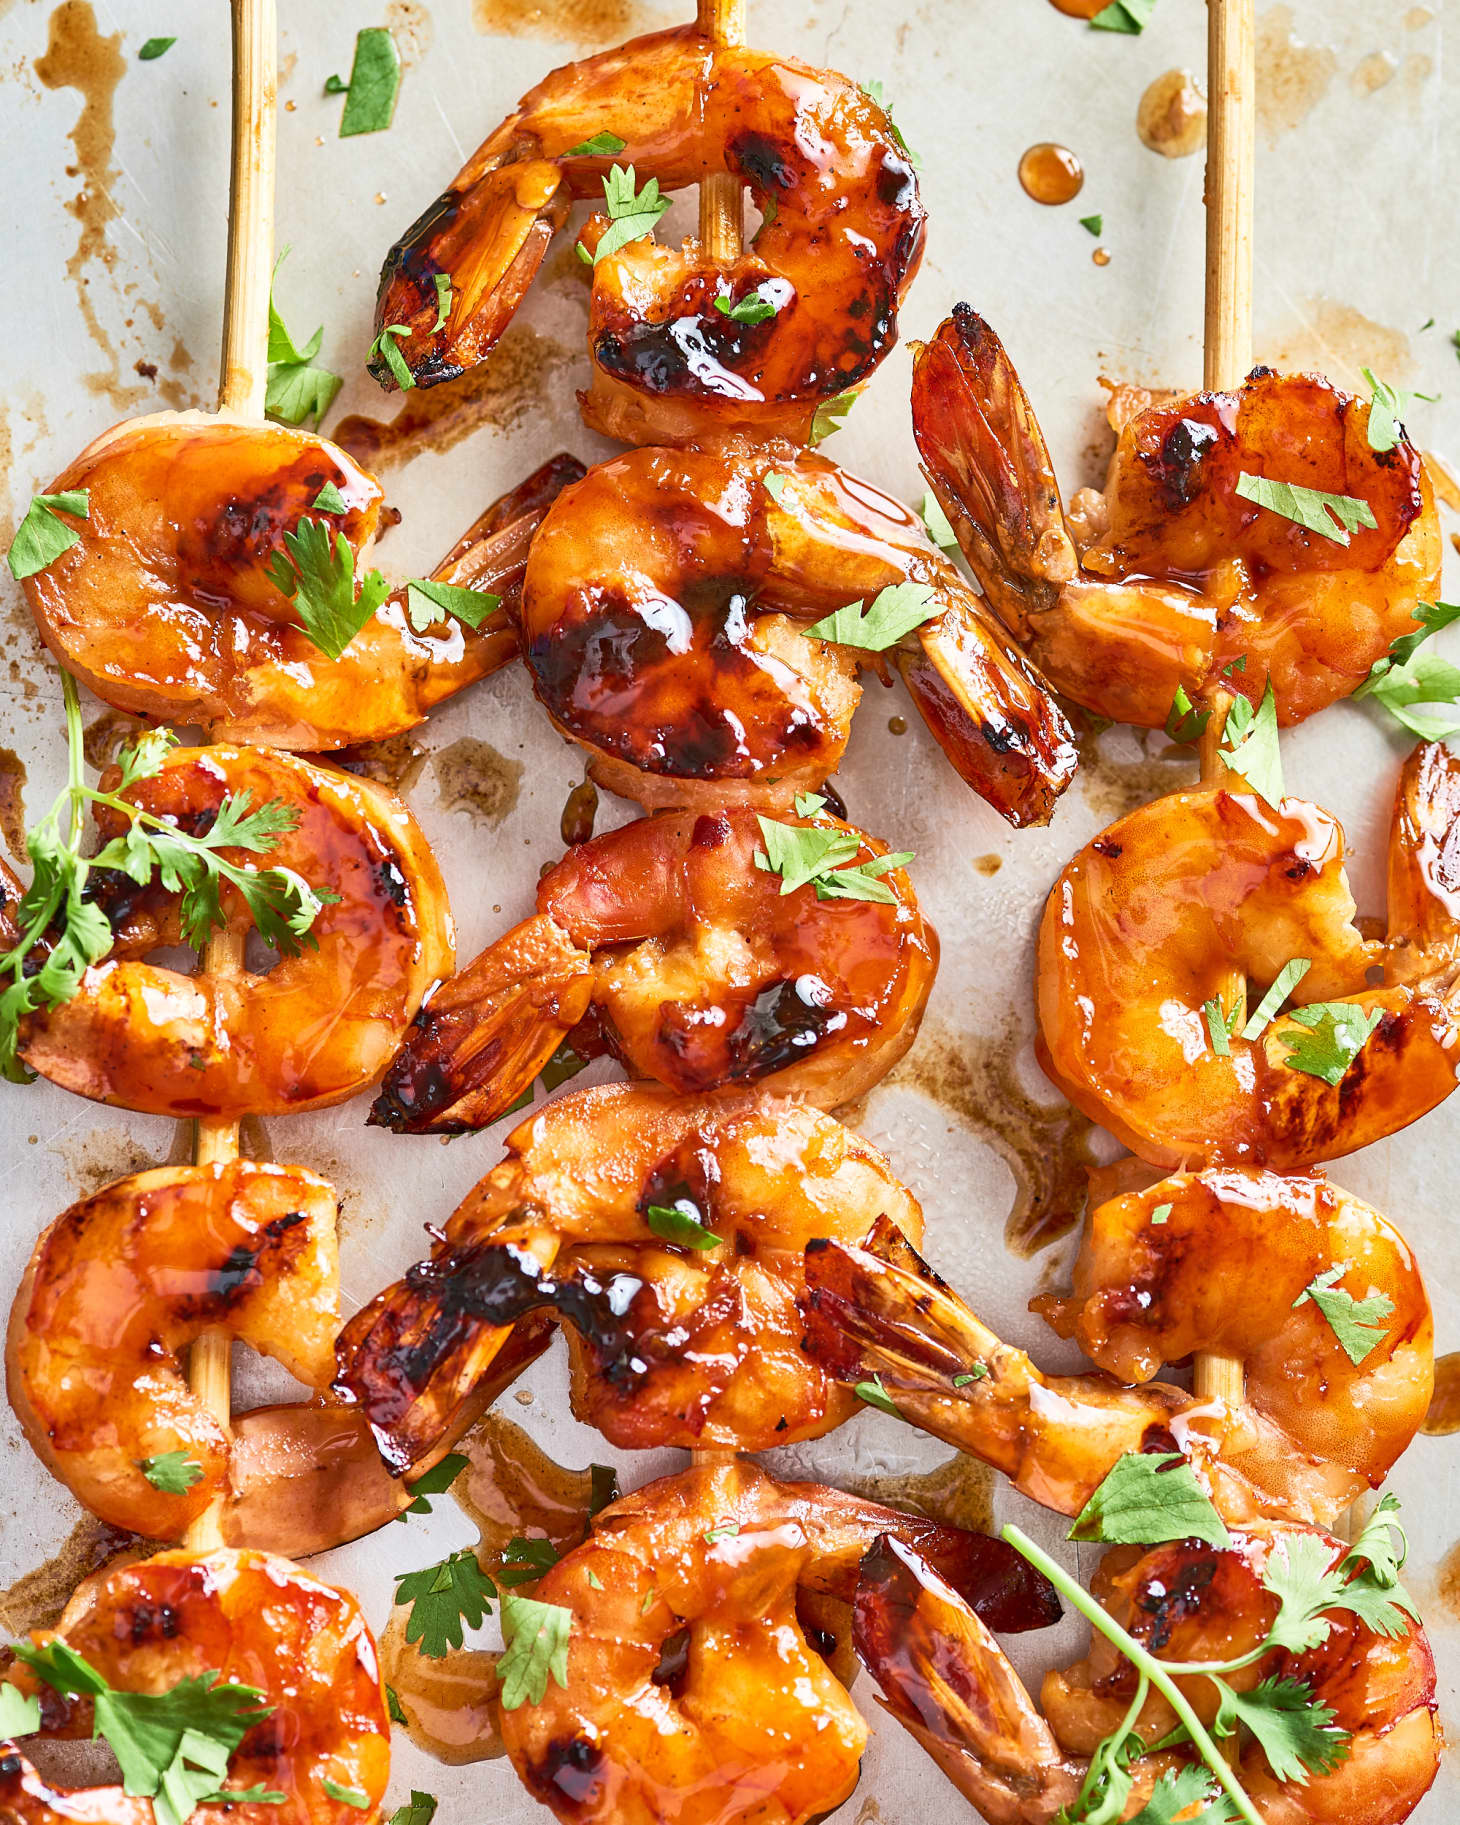 Our 10 Most Popular Summer Seafood Recipes | Kitchn